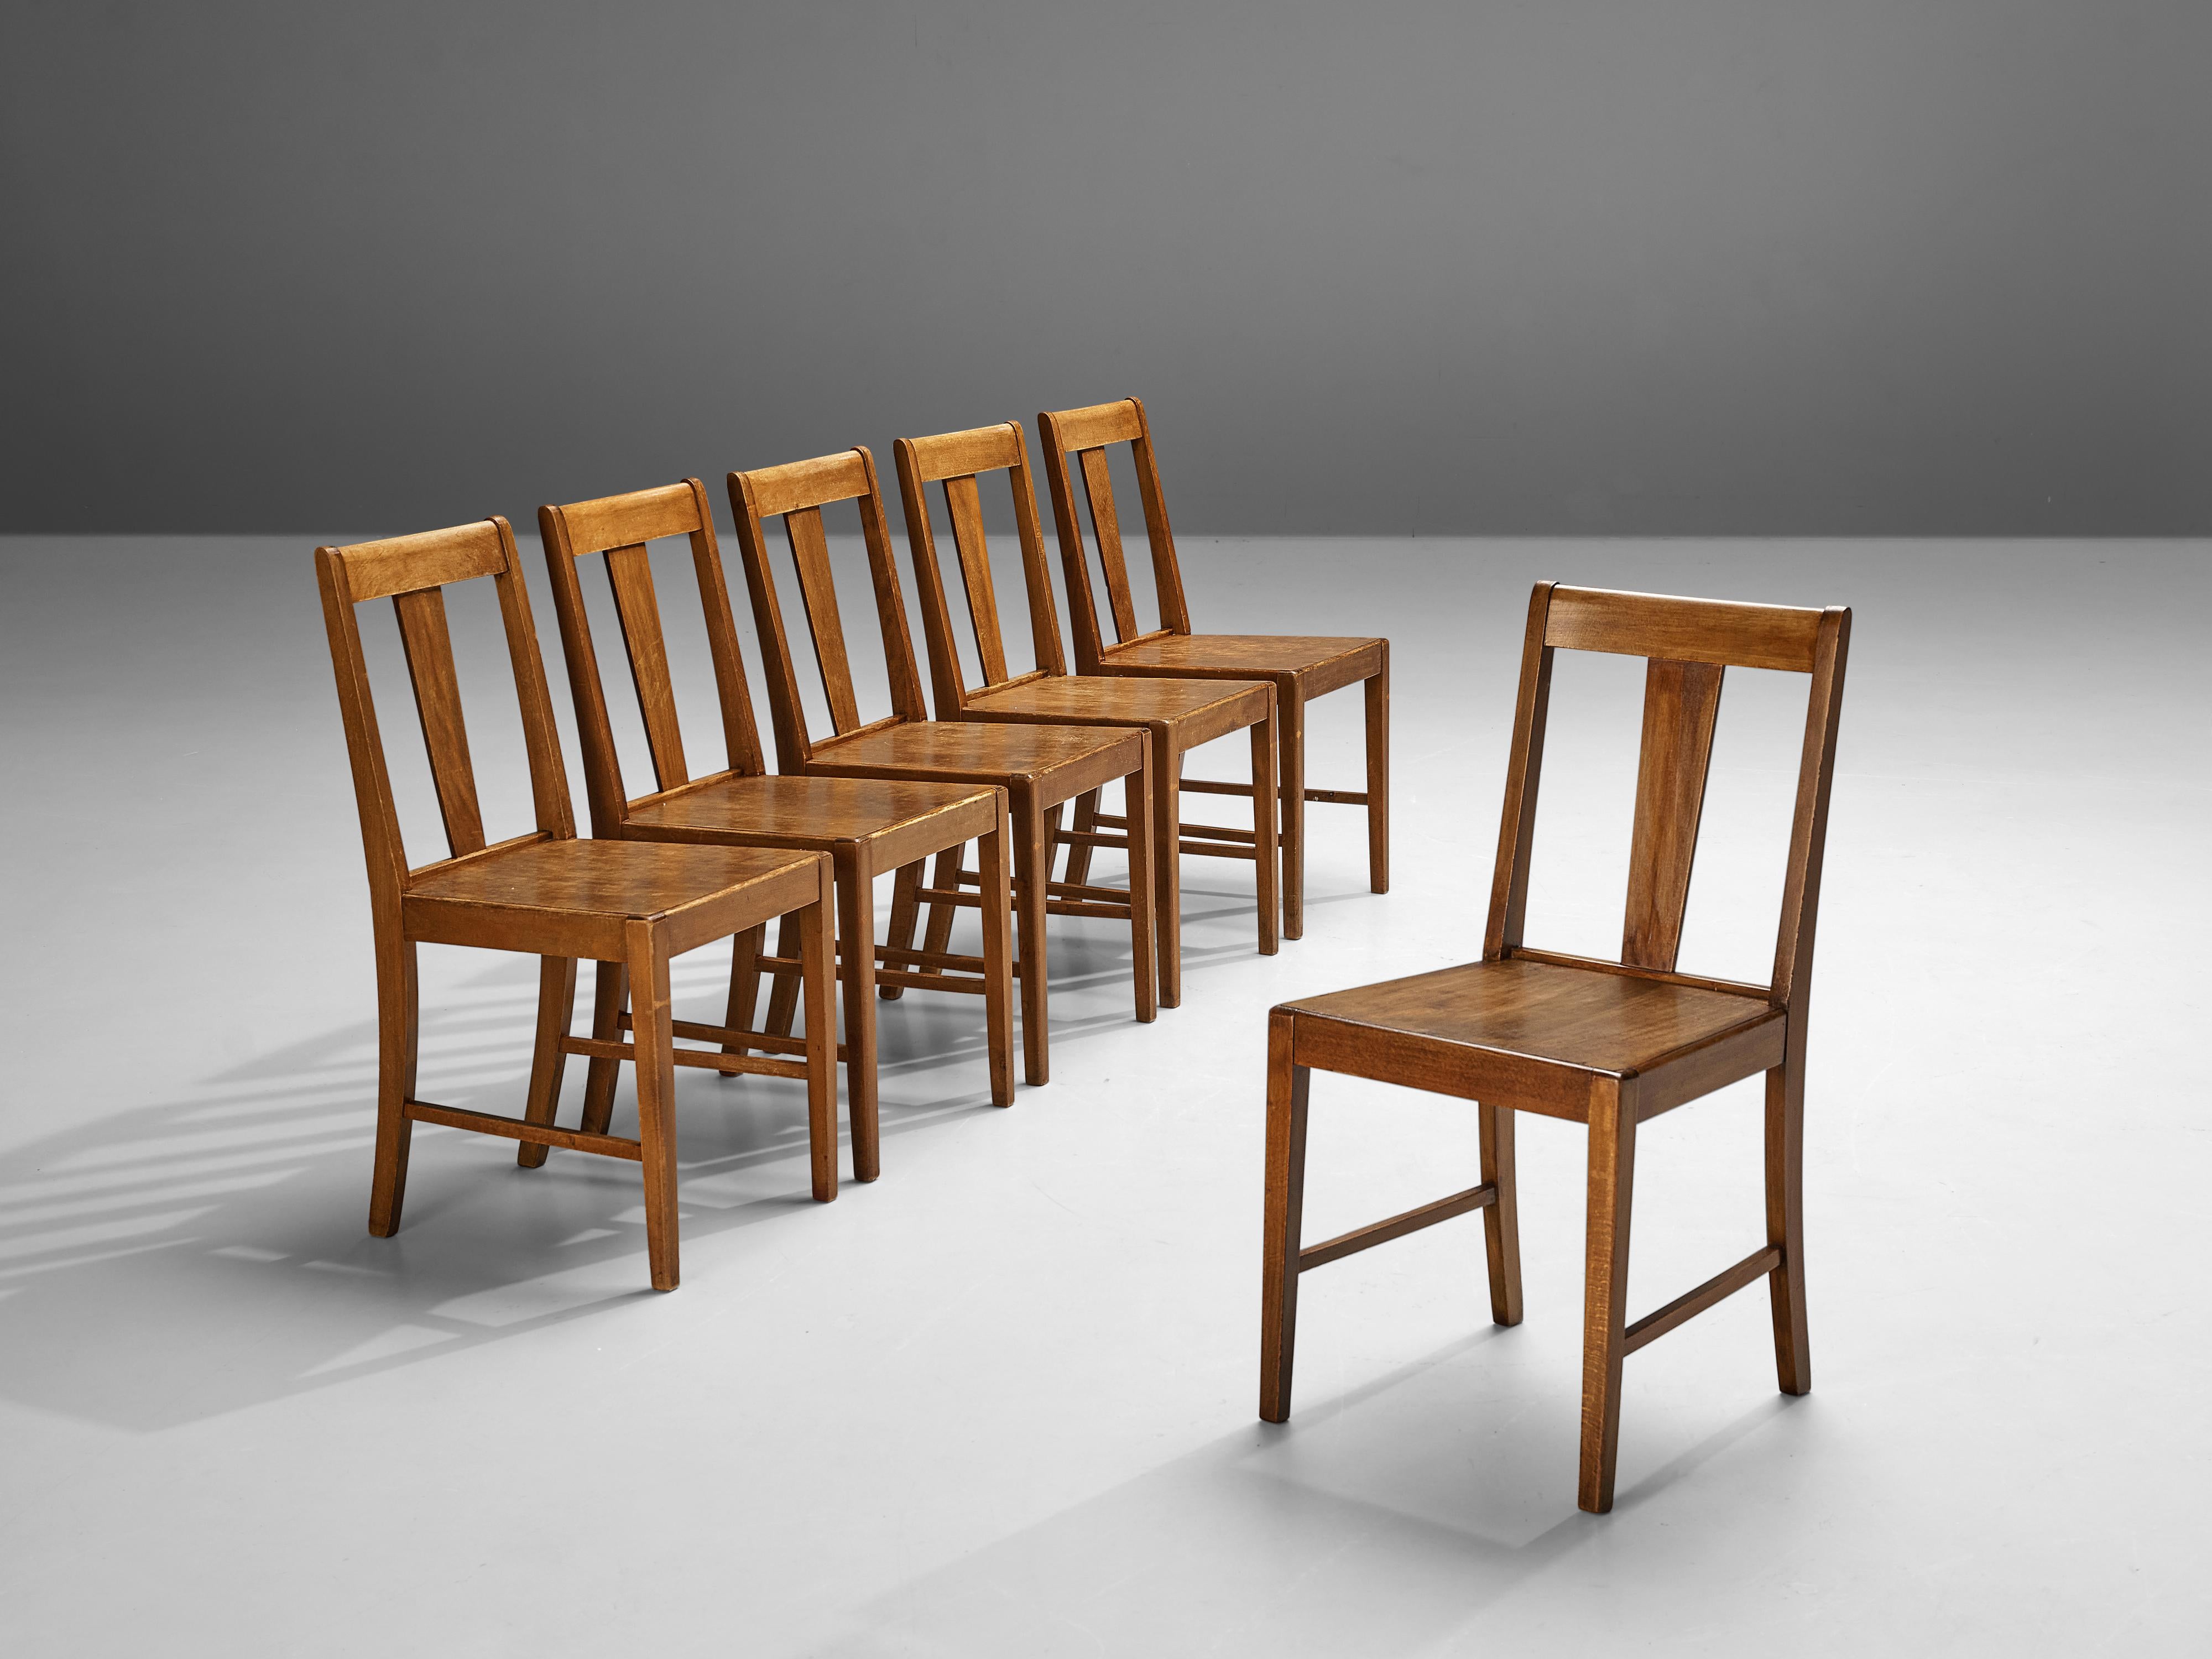 Dining chairs, stained beech, The Netherlands, 1940s

This set of dining chairs is designed with a perfectly balanced backrest and sturdy overall frame. The robust structure is evident in the solidly built legs, contributing to the chairs'